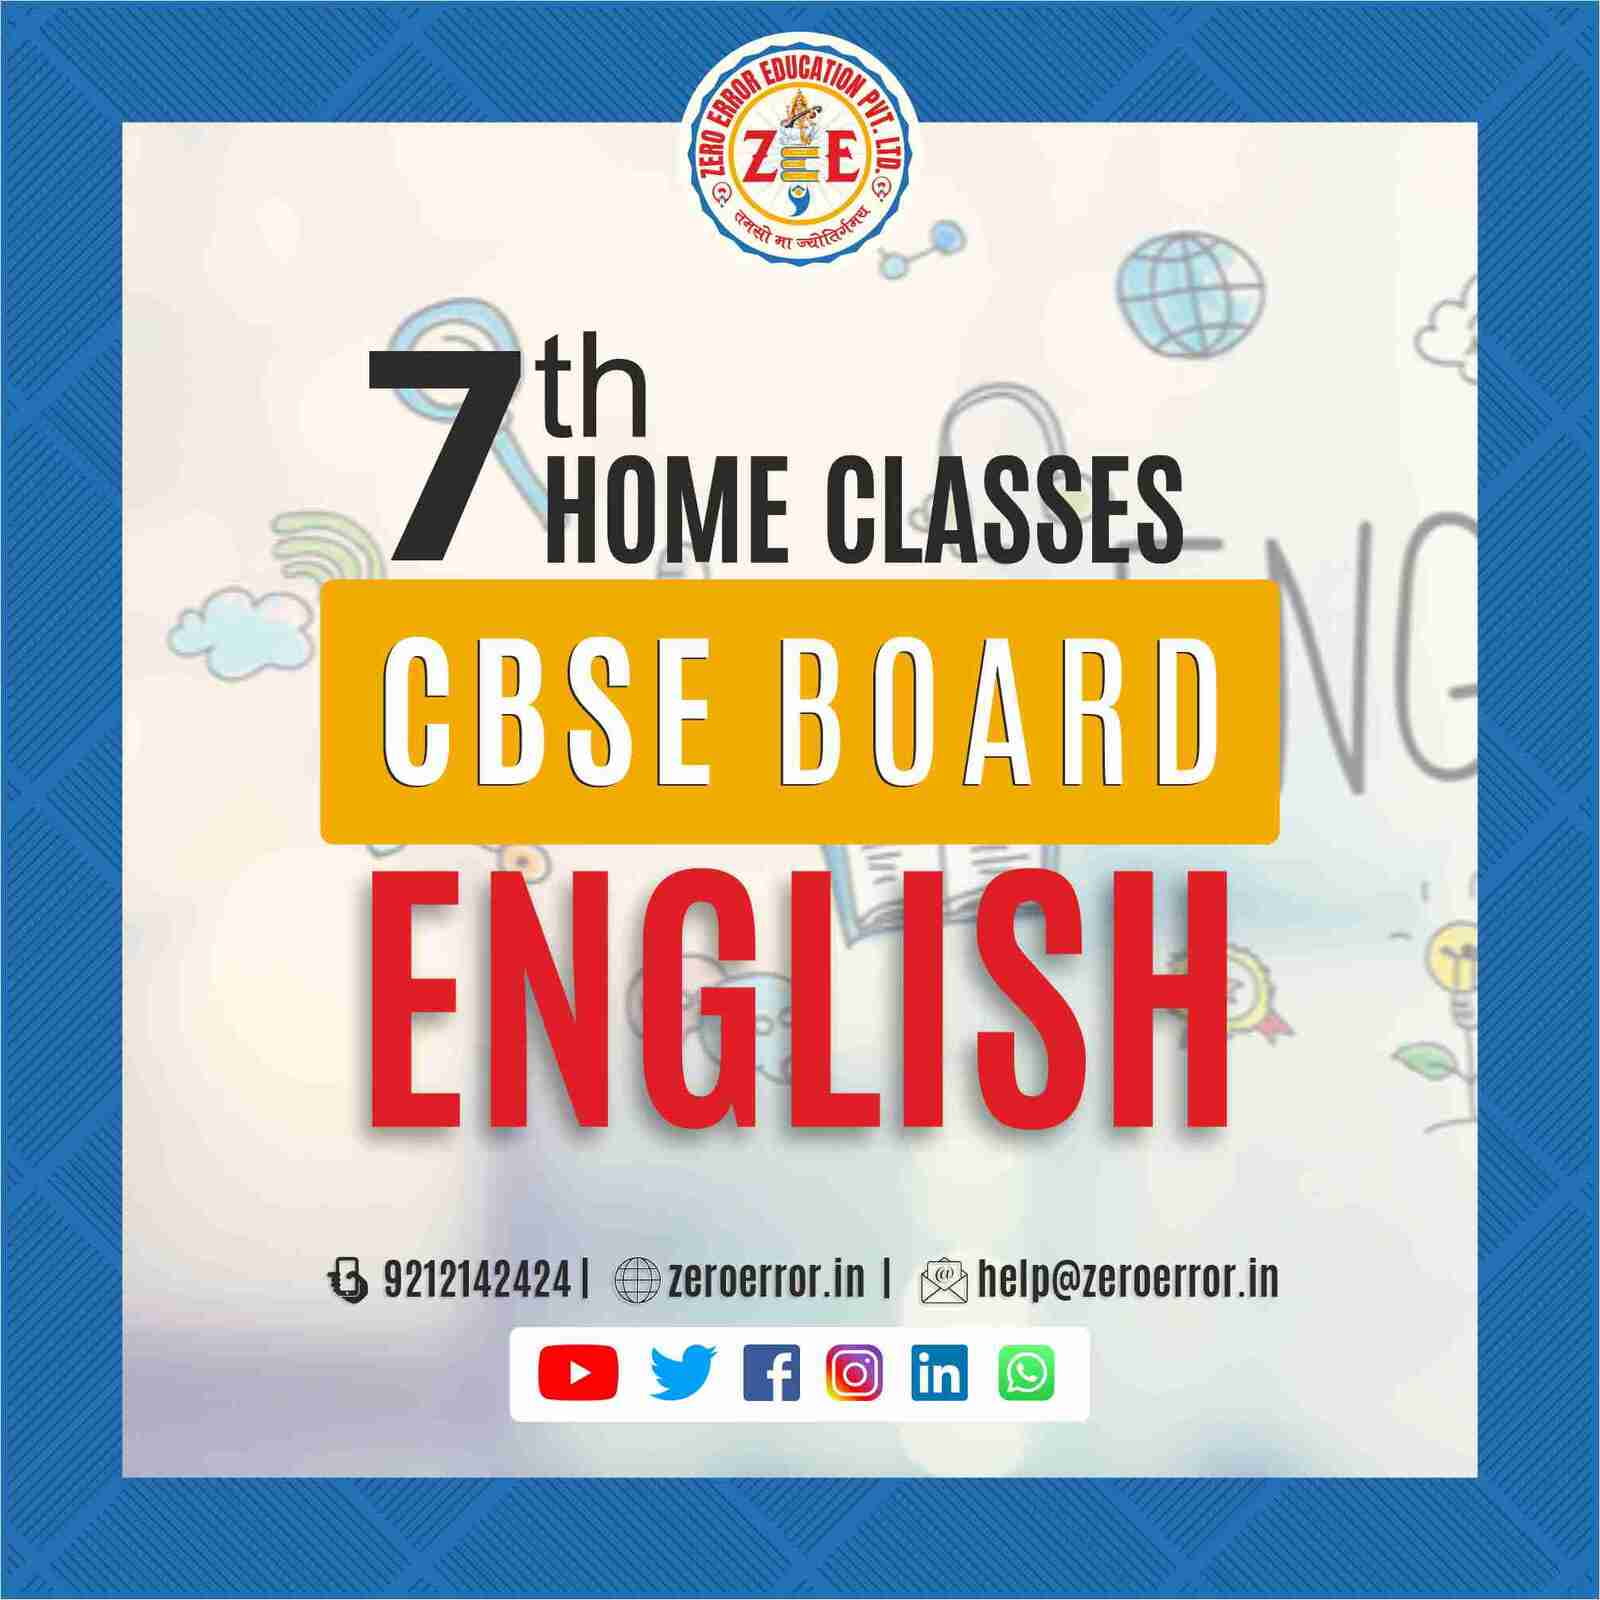 7th Grade CBSE English Online Classes by Zero Error Education Prepare for your CBSE board exams with online and offline English classes for 7th grade. Learn from experienced home tutors and get all the help you need to succeed. Enroll today at Zero Error Education. [https://zeroerror.in/] Call 9212142424 for more information.